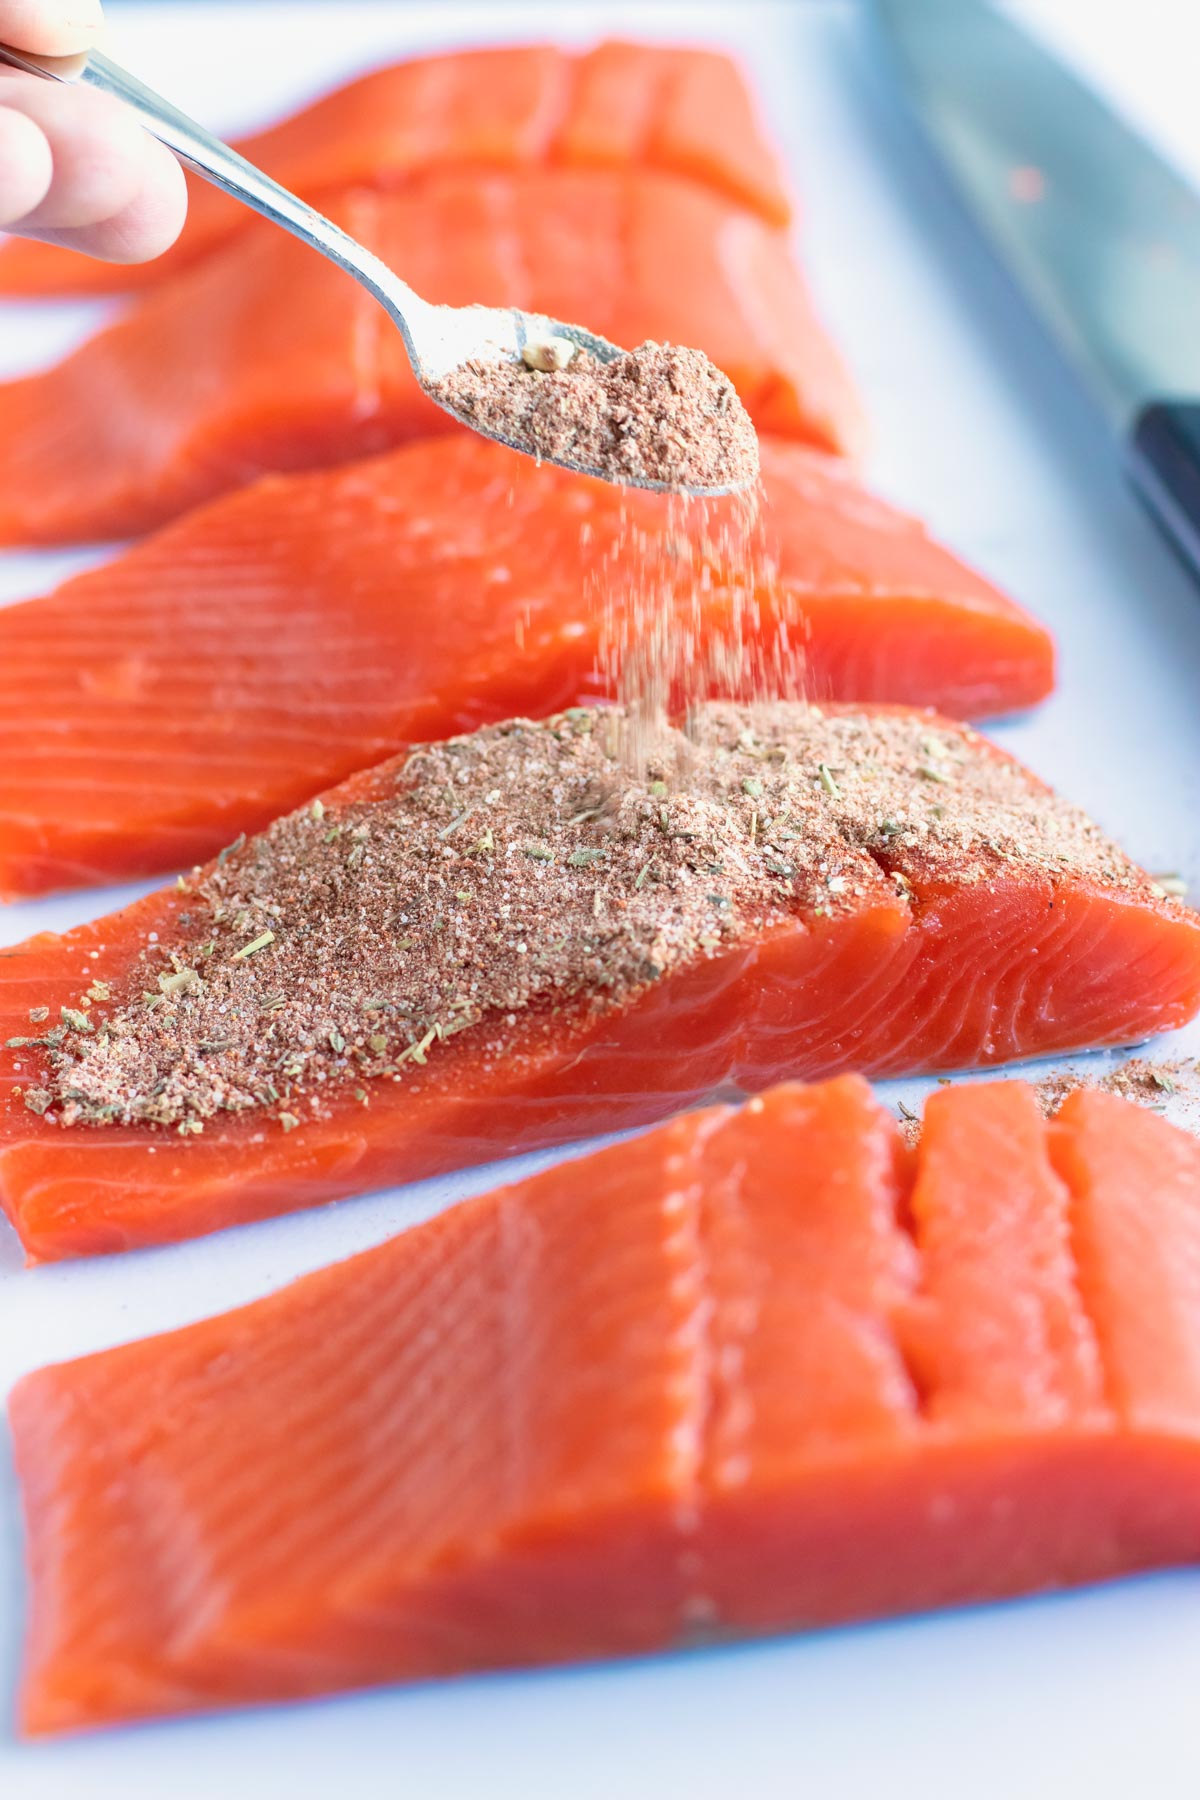 Homemade seasoning mix being sprinkled over salmon to make a blackened salmon recipe.